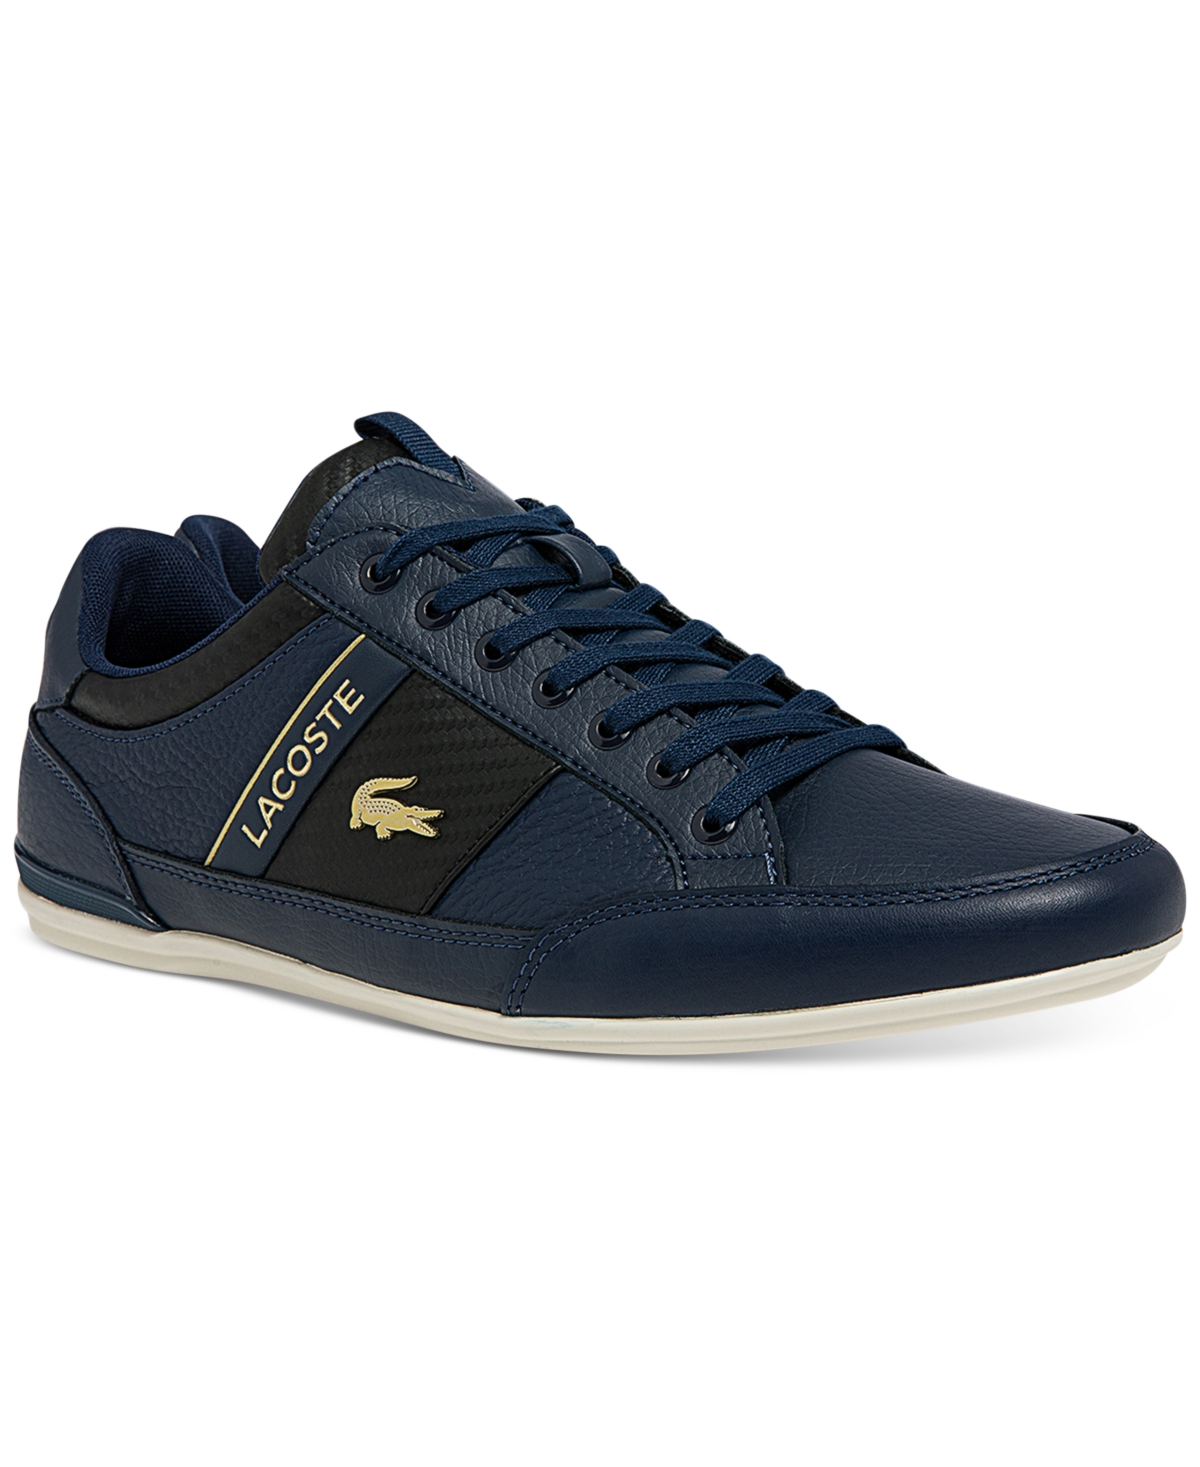 Lacoste Chaymon 0120 Mens Faux Leather Comfy Casual And Fashion Sneakers In Blue